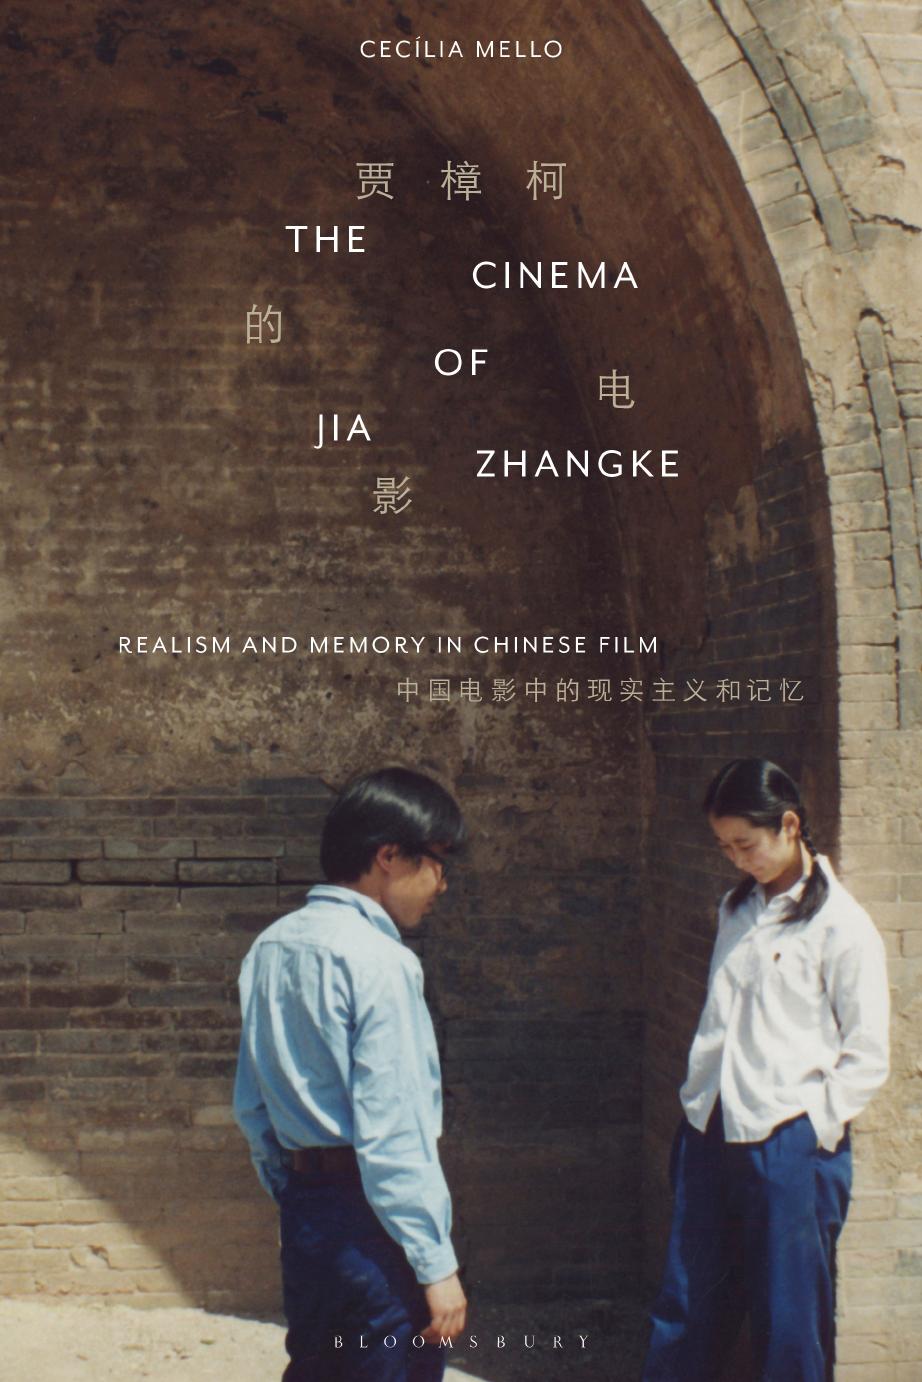 The Cinema of Jia Zhangke: Realism and Memory in Chinese Film by CeCilia Mello